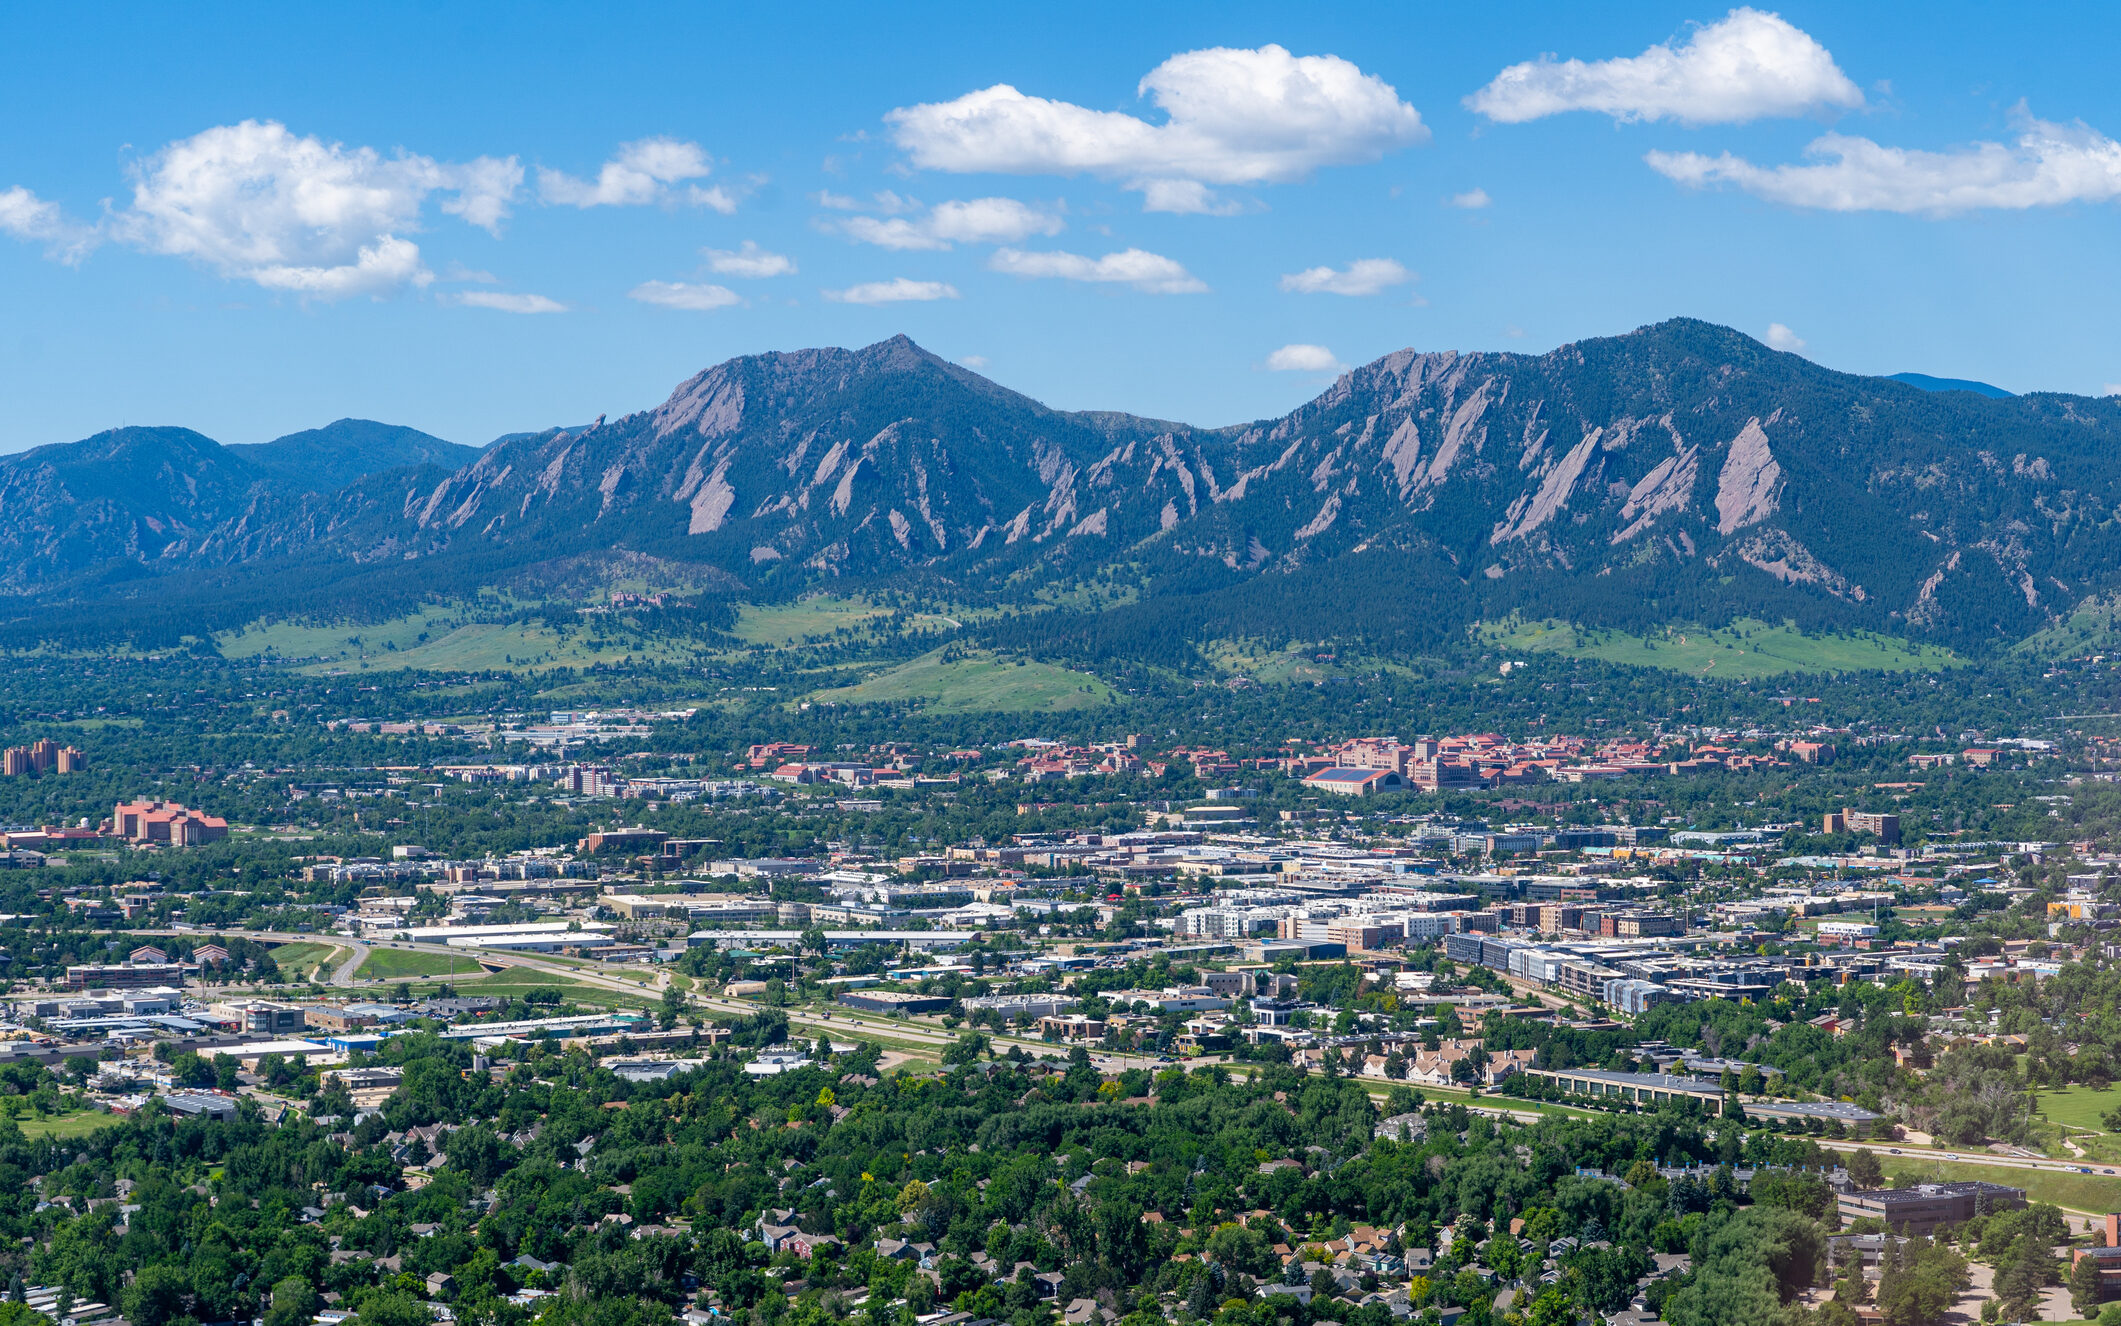 Aerial View above Boulder Colorado looking southwest towards University of Colorado and Flatiron Mountains